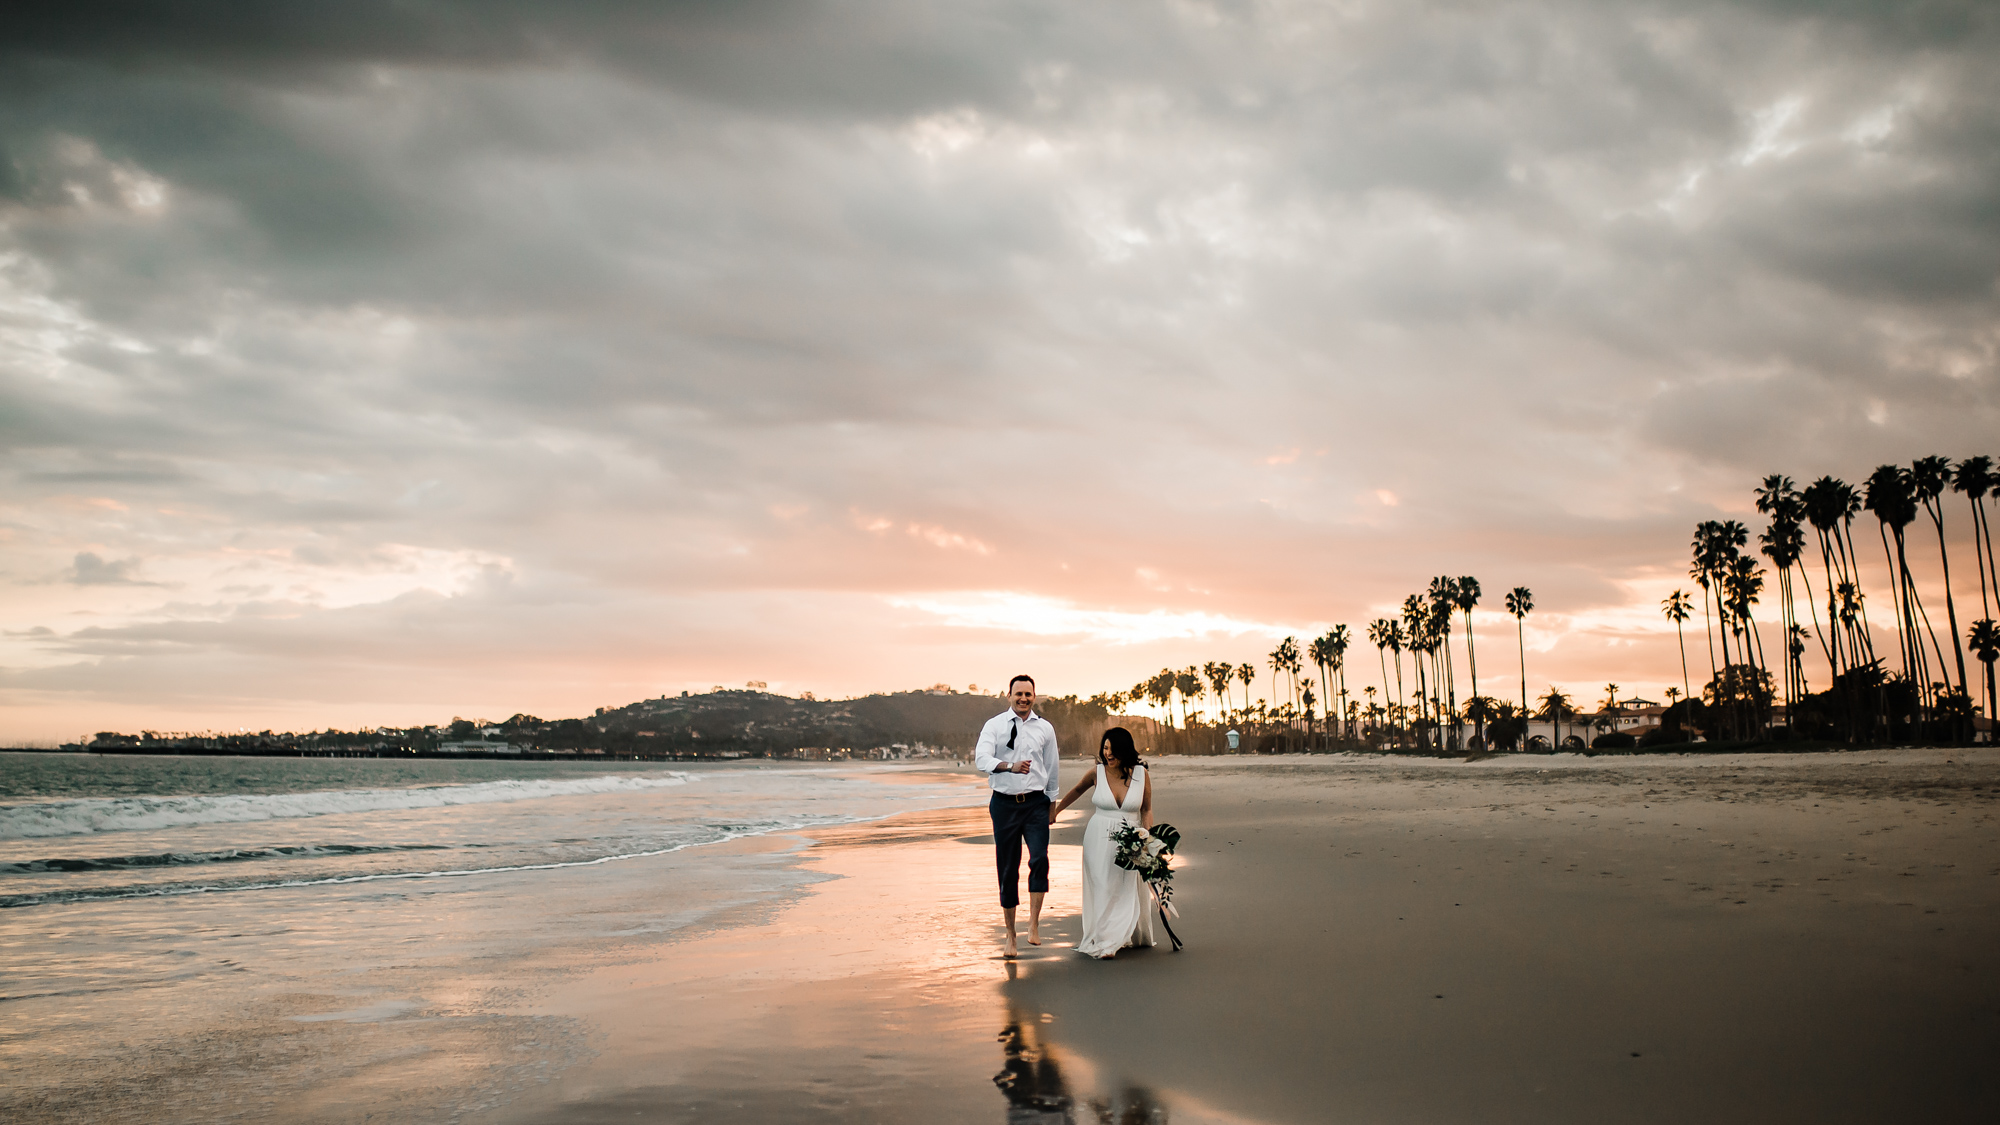 A couple holding hands walking on the beach with wedding bouquet at sunset near palm trees at Mar Monte Hotel in Santa Barbara, CA